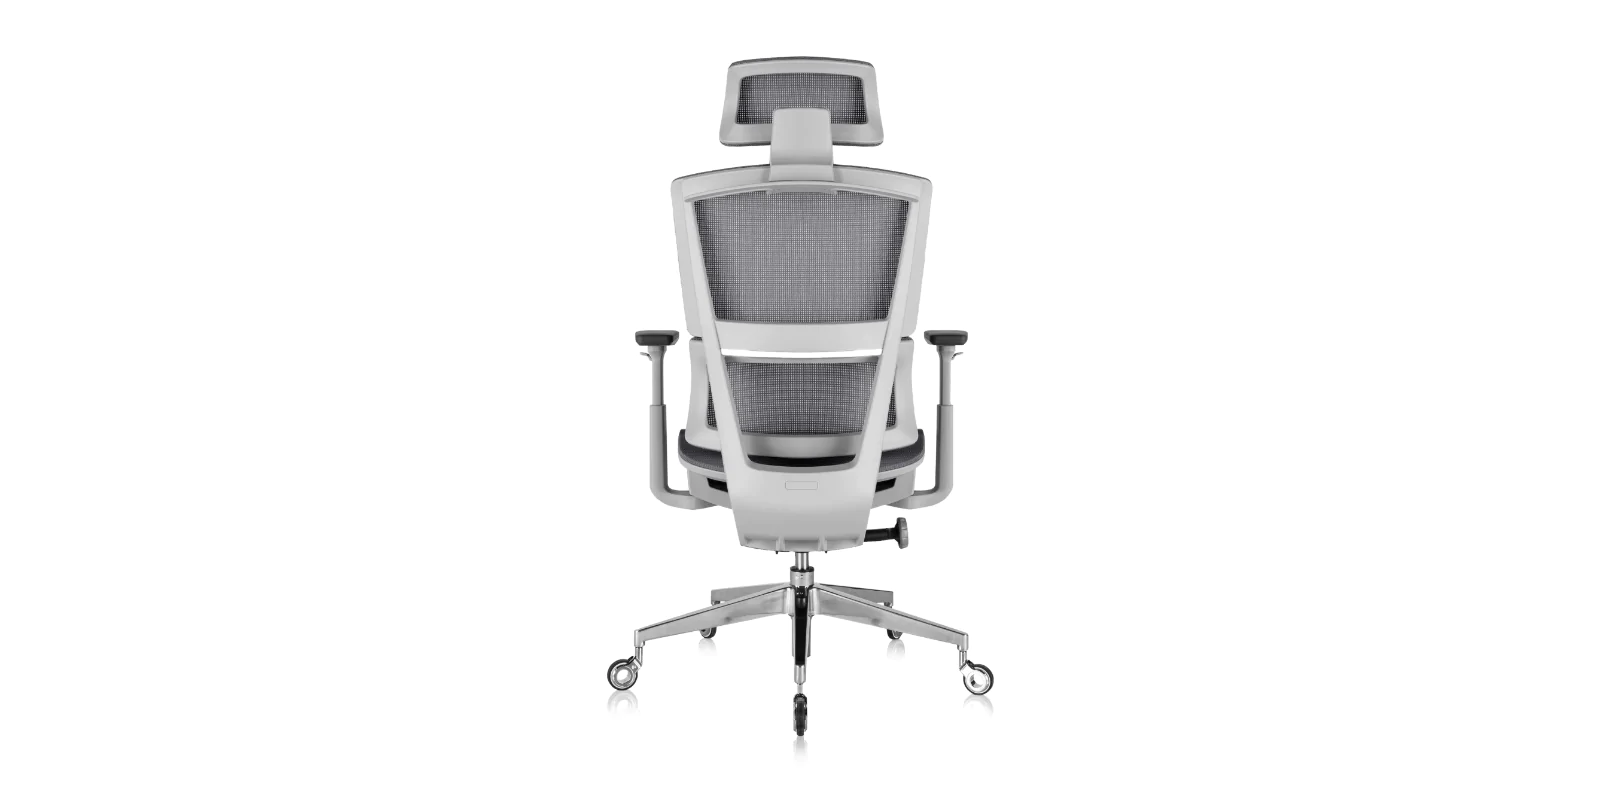 What's the best office chair for back pain?